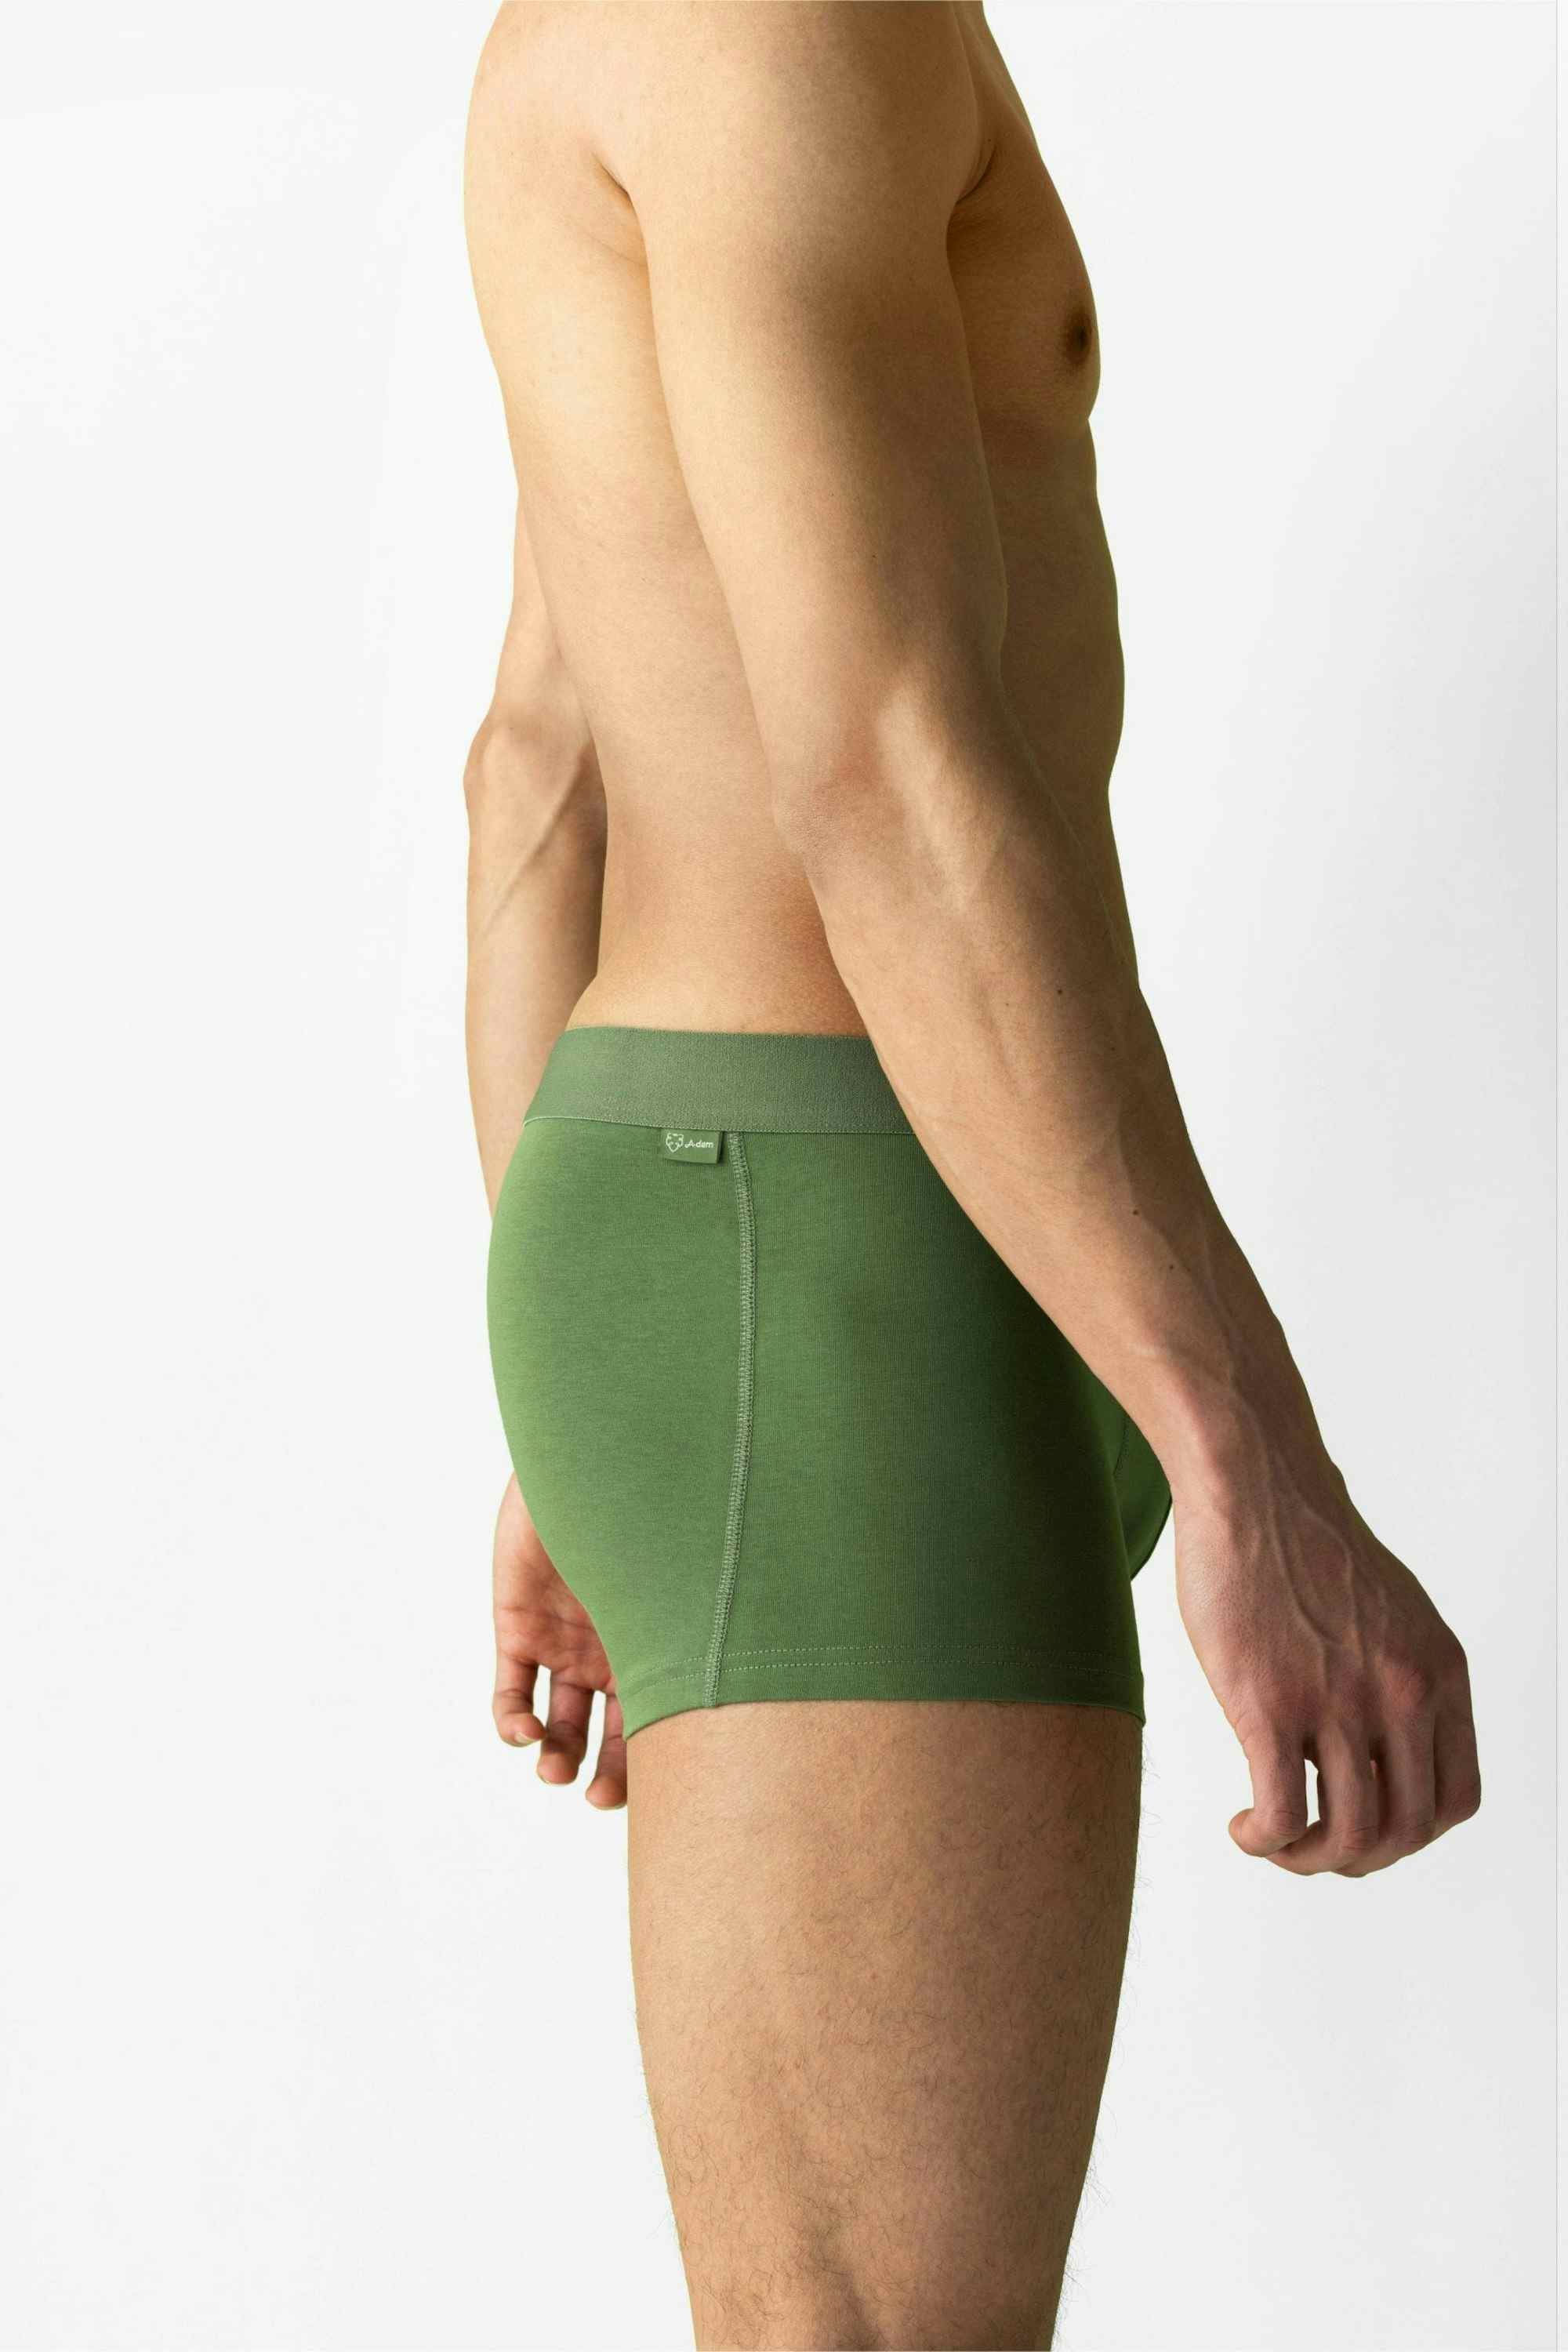 Solid Green Trunk